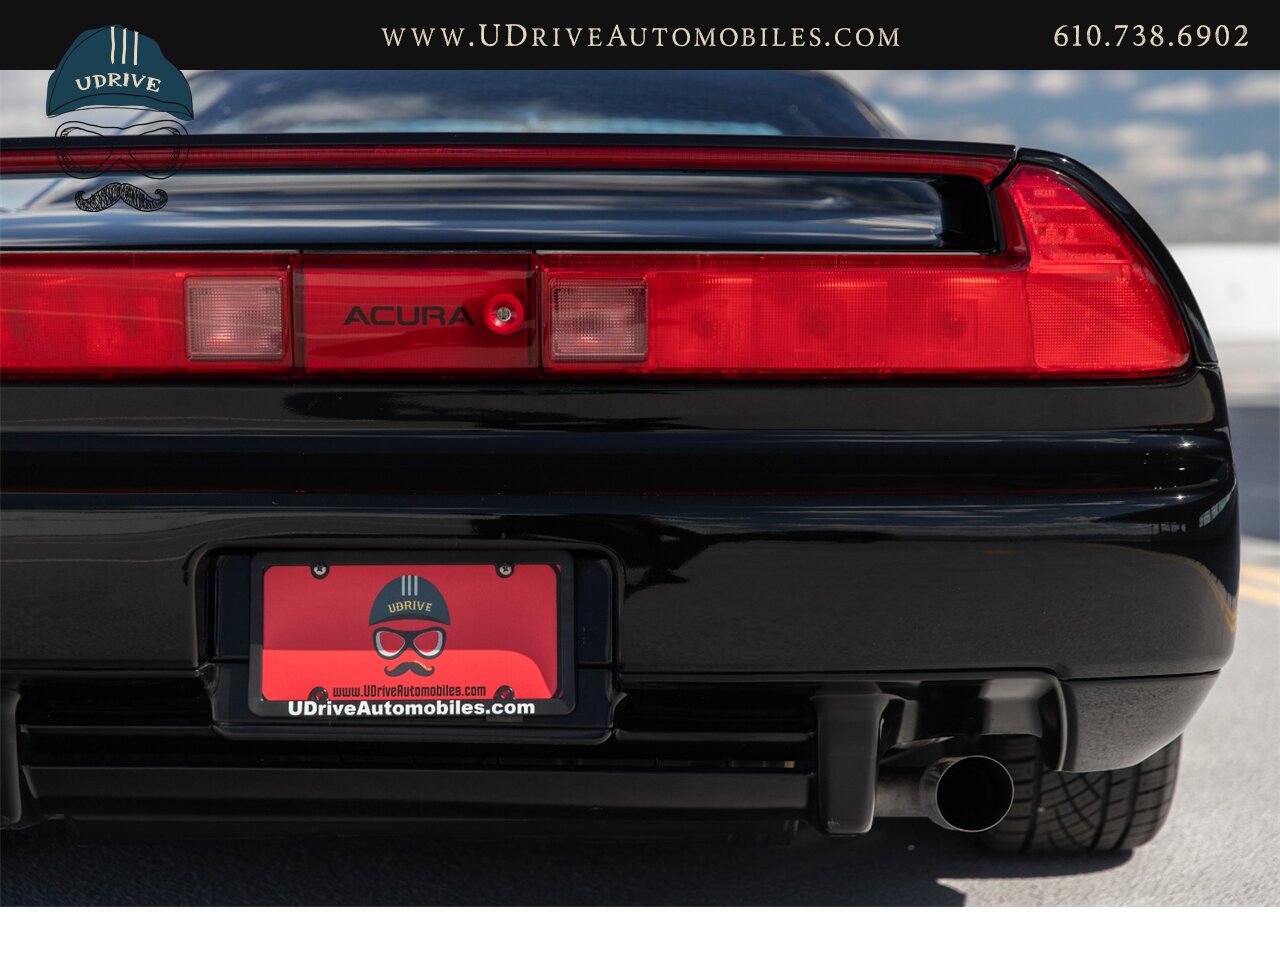 1996 Acura NSX NSX-T  5 Speed Manual Fresh Timing Belt Service - Photo 23 - West Chester, PA 19382